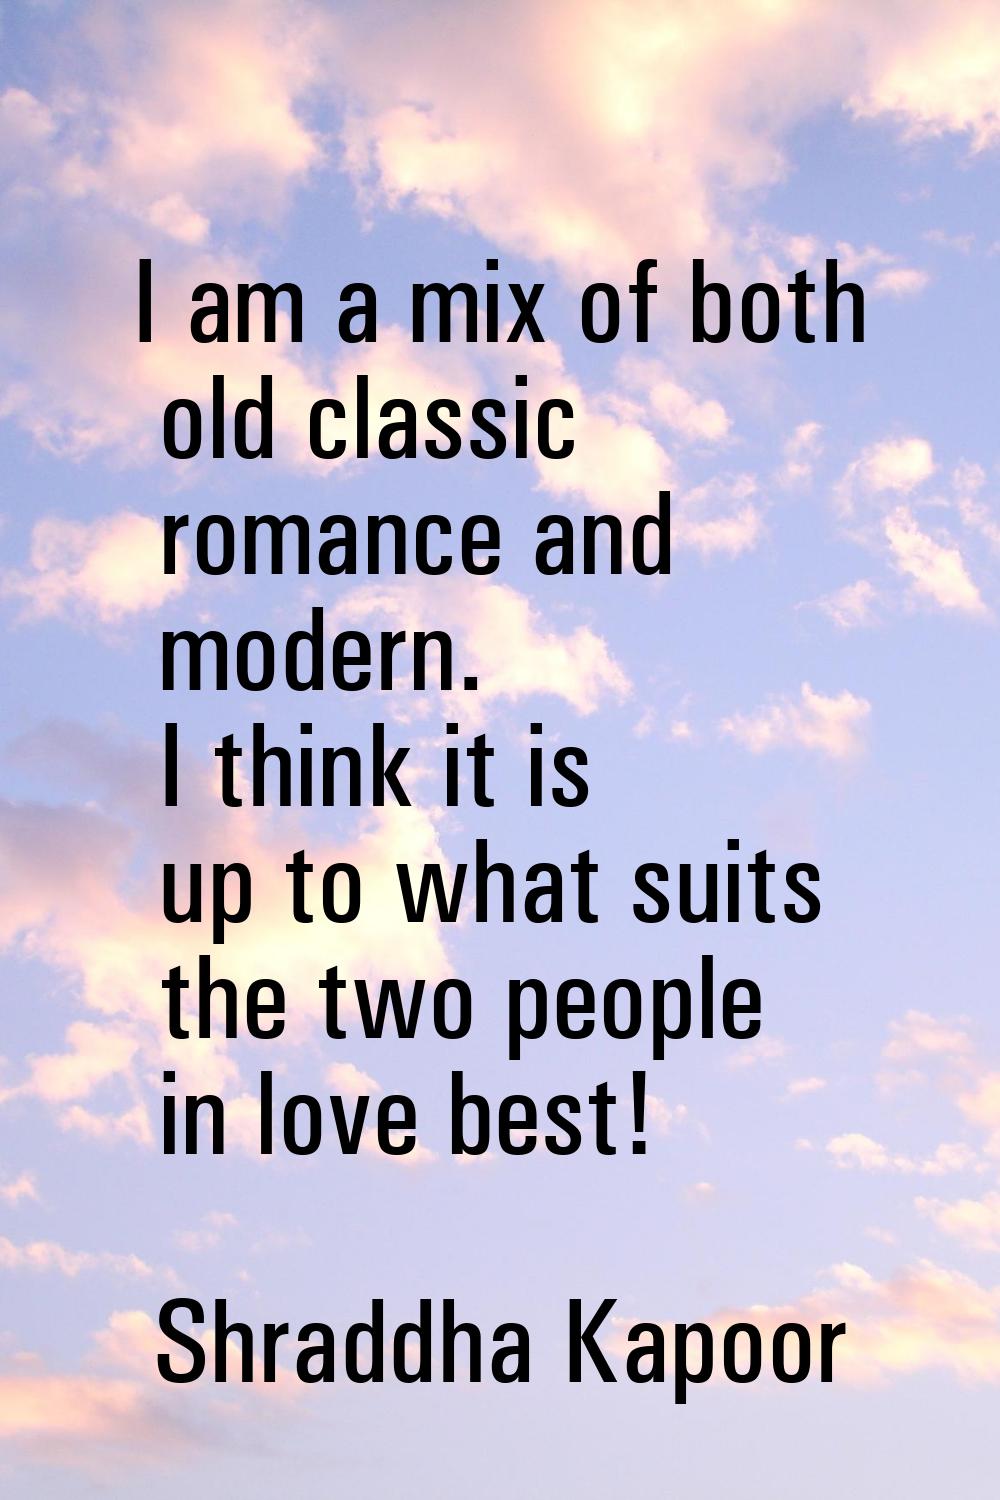 I am a mix of both old classic romance and modern. I think it is up to what suits the two people in